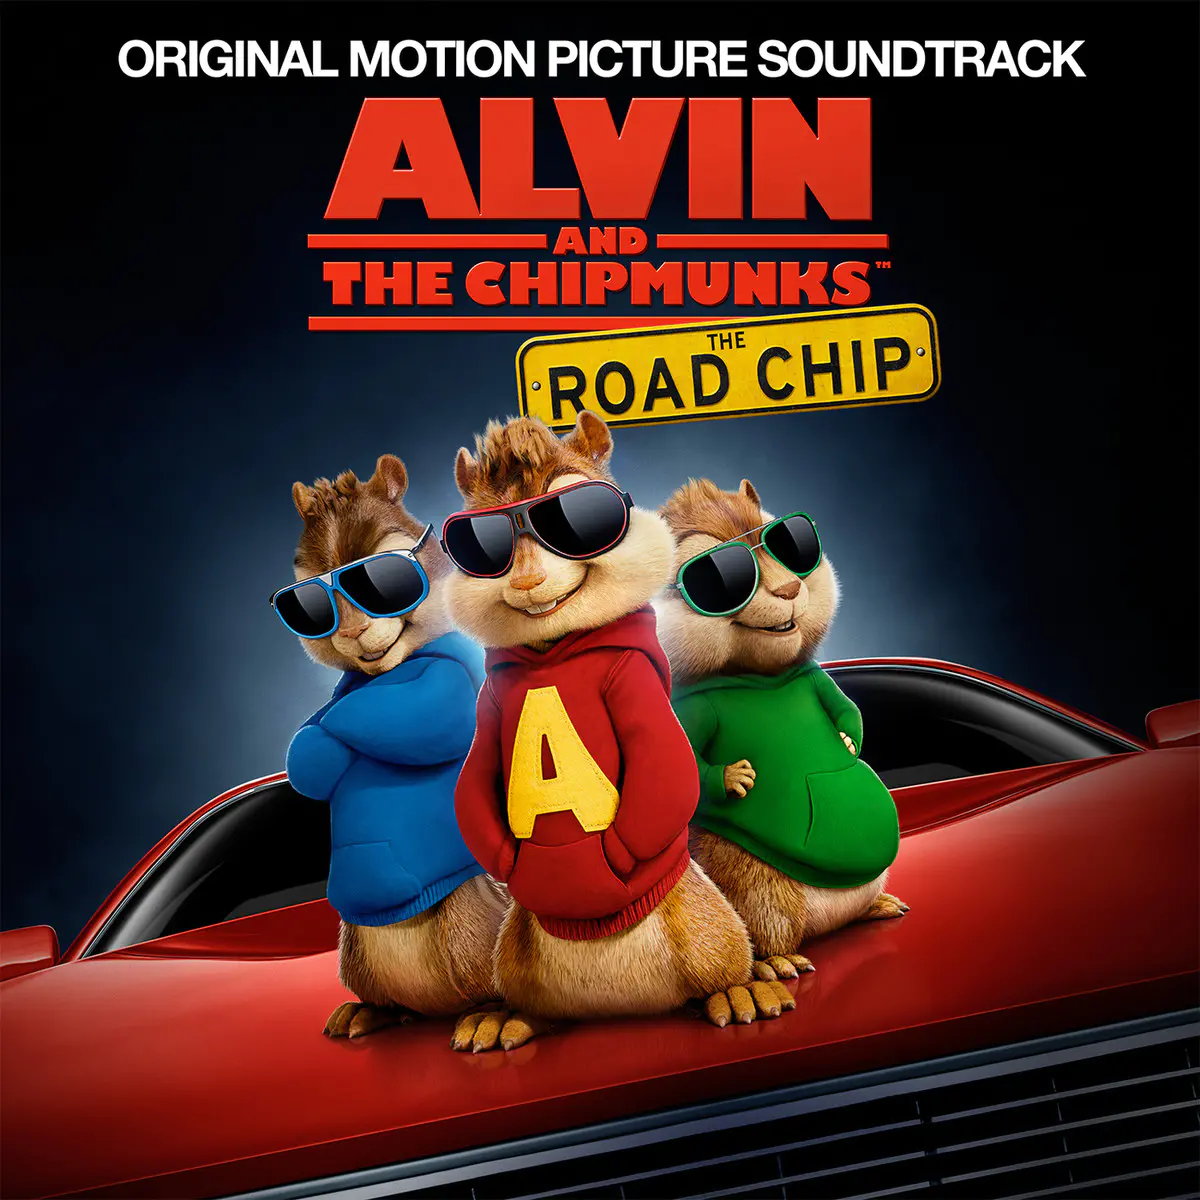 Oh My Love Lyrics In English Alvin And The Chipmunks The Road Chip Original Motion Picture Soundtrack Oh My Love Song Lyrics In English Free Online On Gaana Com